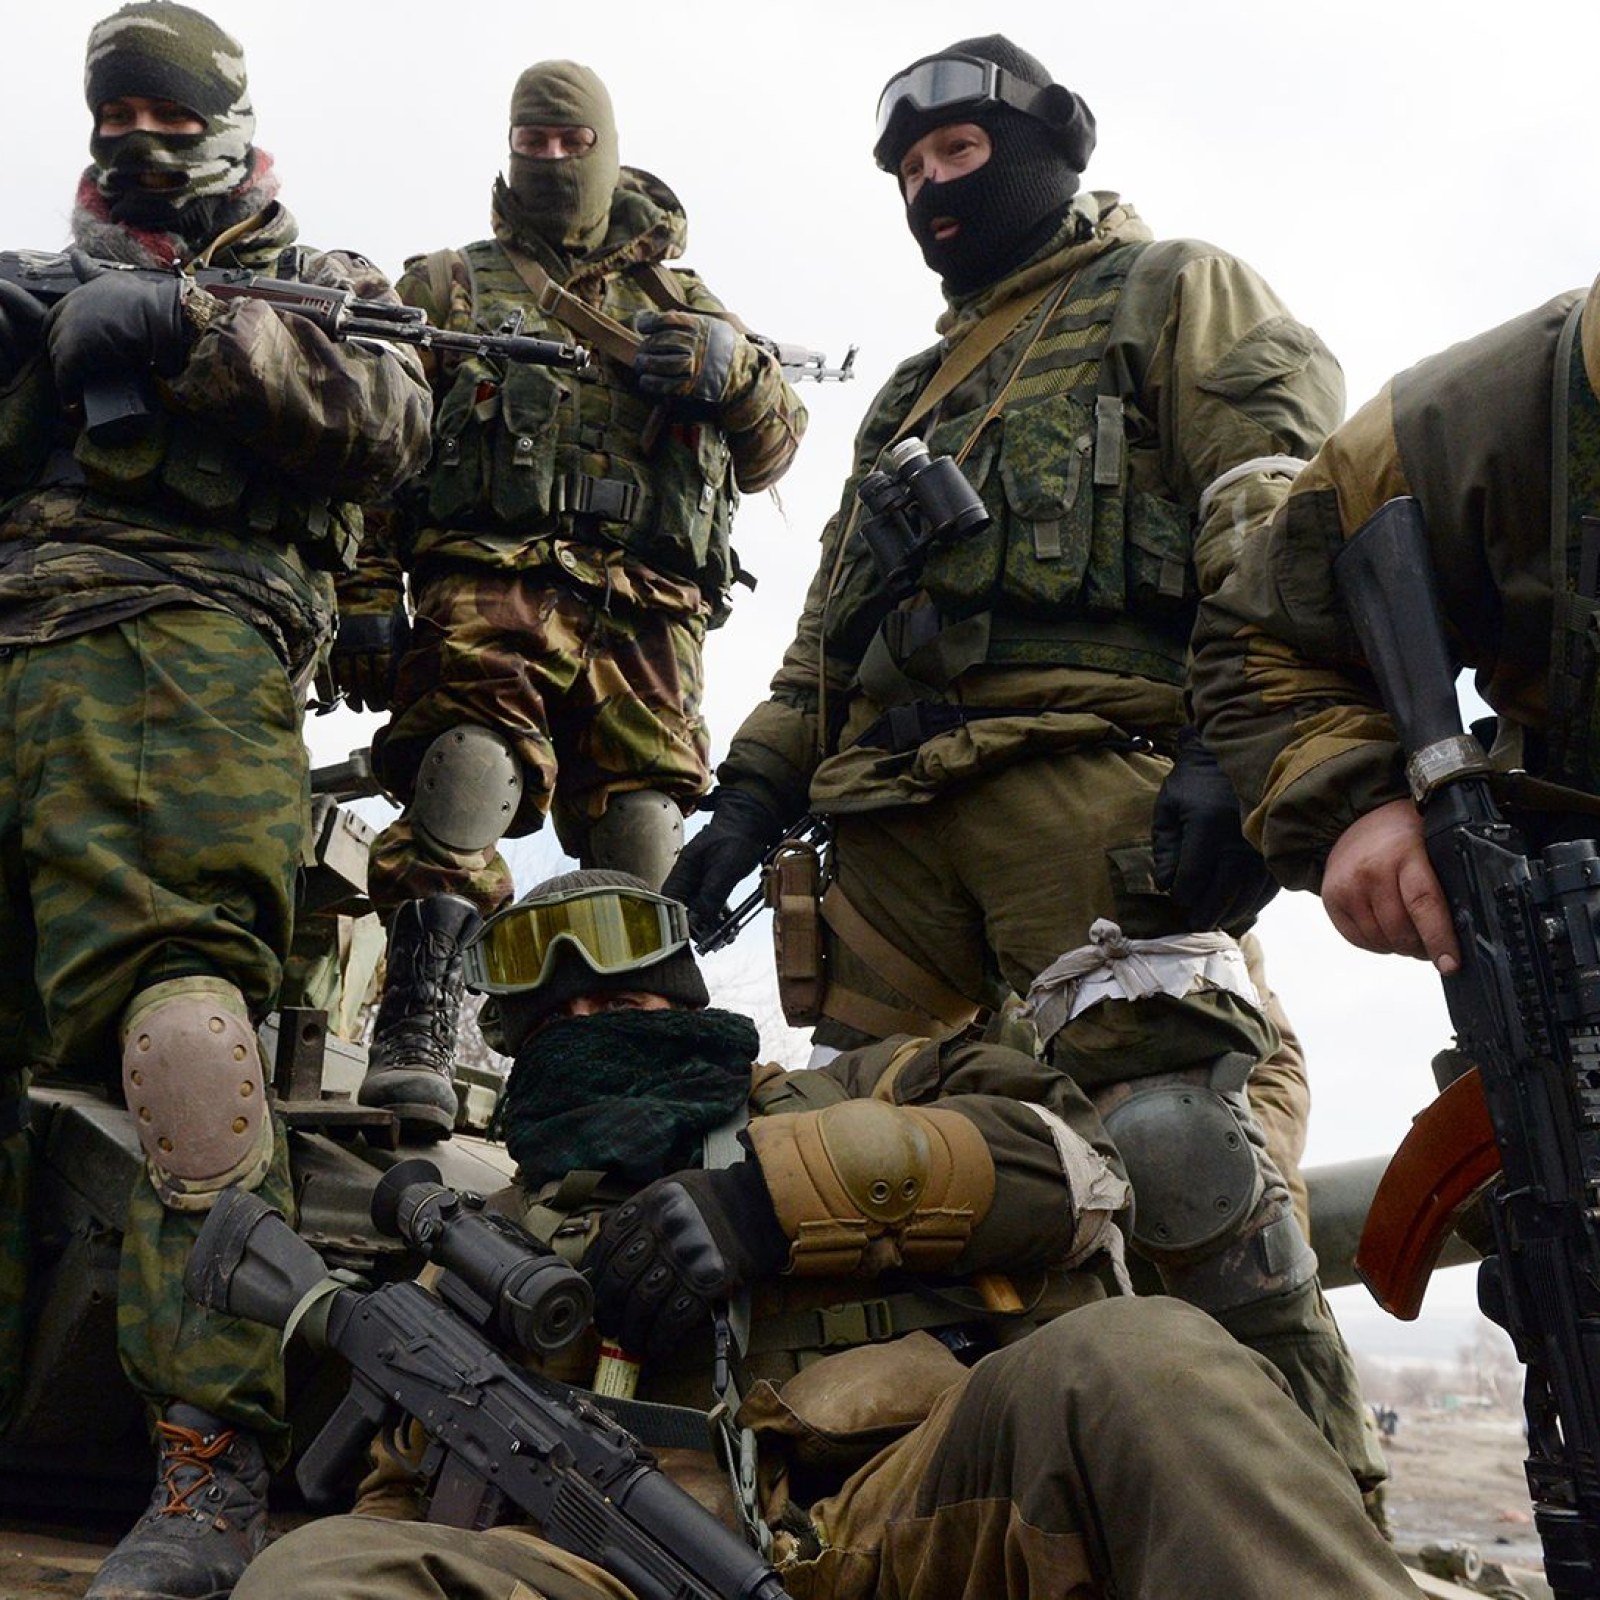 Putin's Secret Armies Waged War in Syria—Where Will They Fight Next?